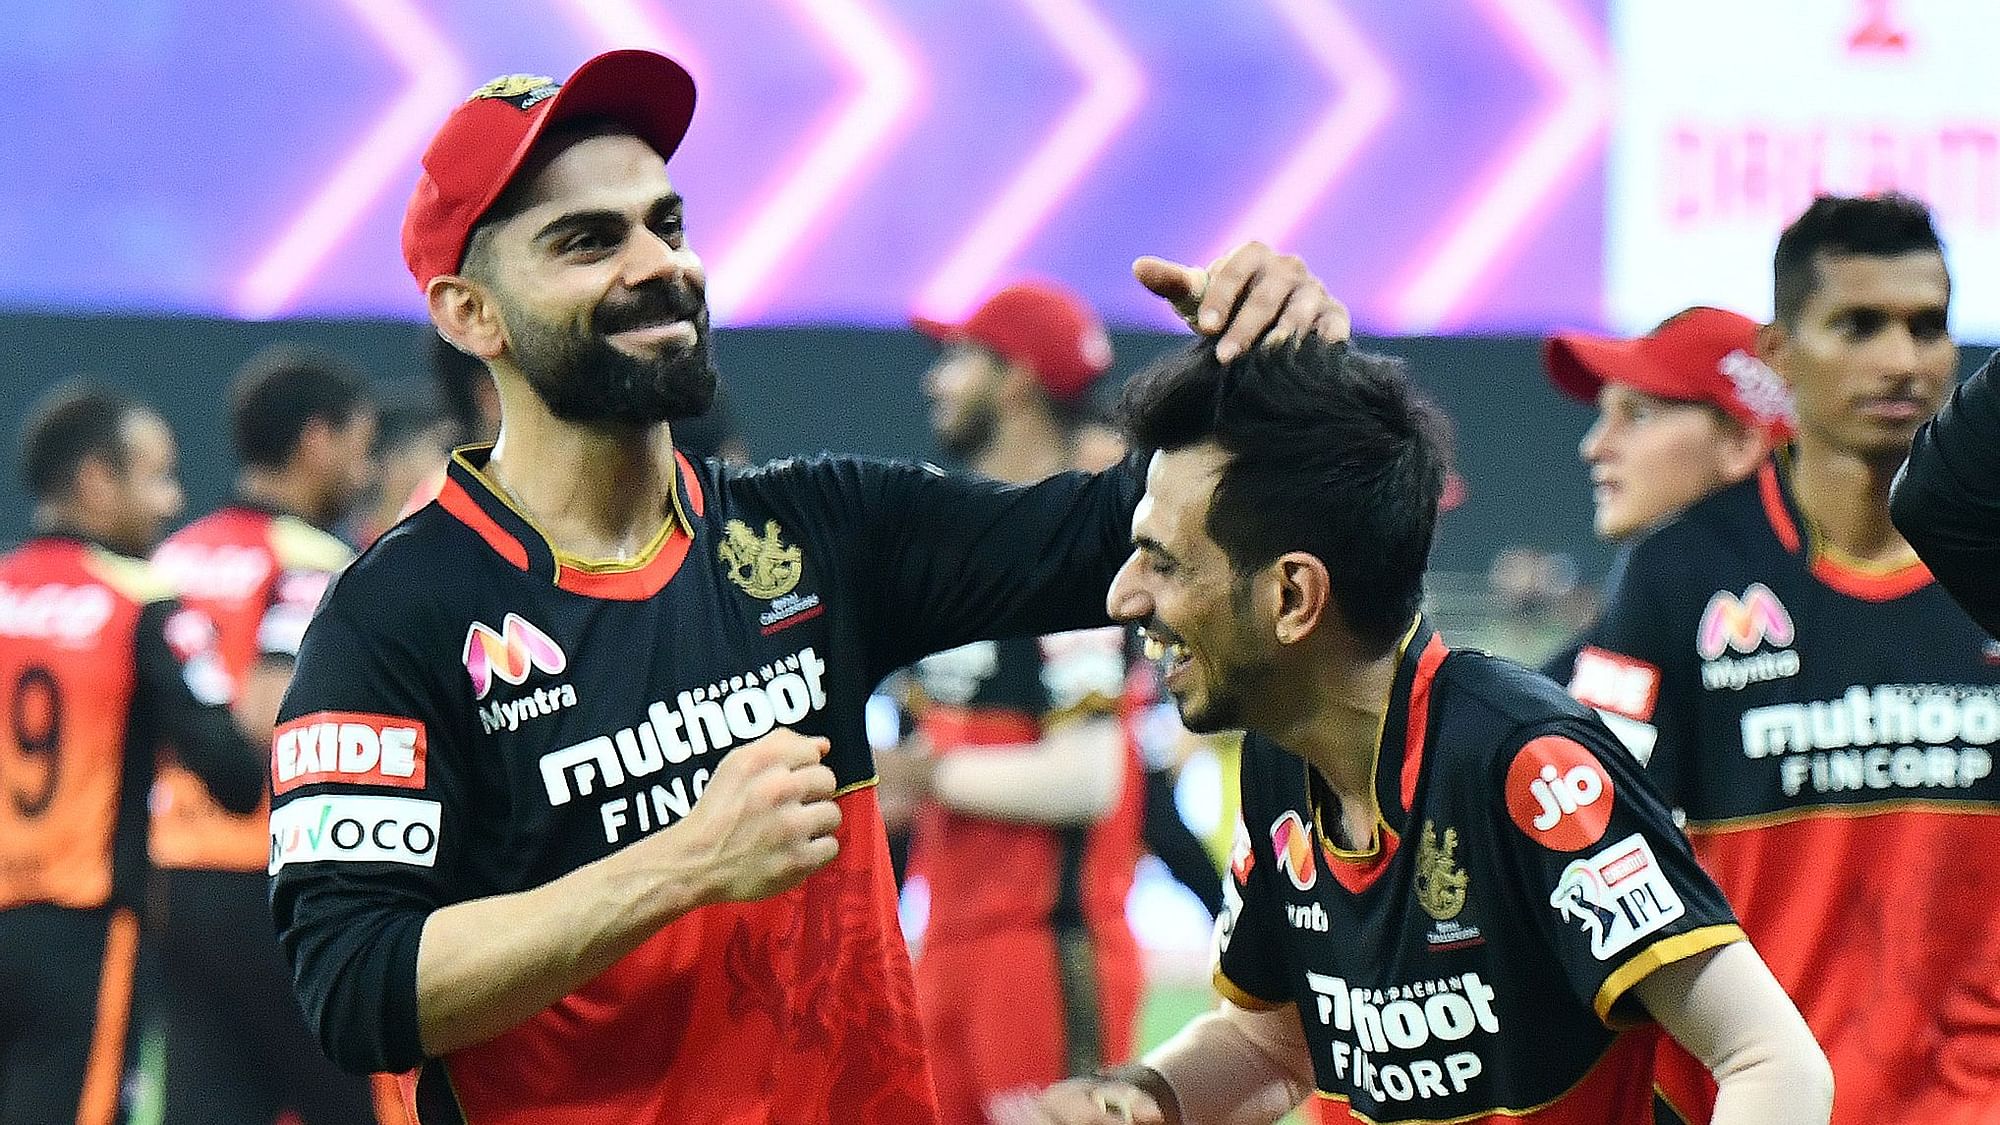 ‘Yuzi (Chahal) came in and changed the game for us,’ said Virat Kohli after RCB beat Sunrisers Hyderabad.